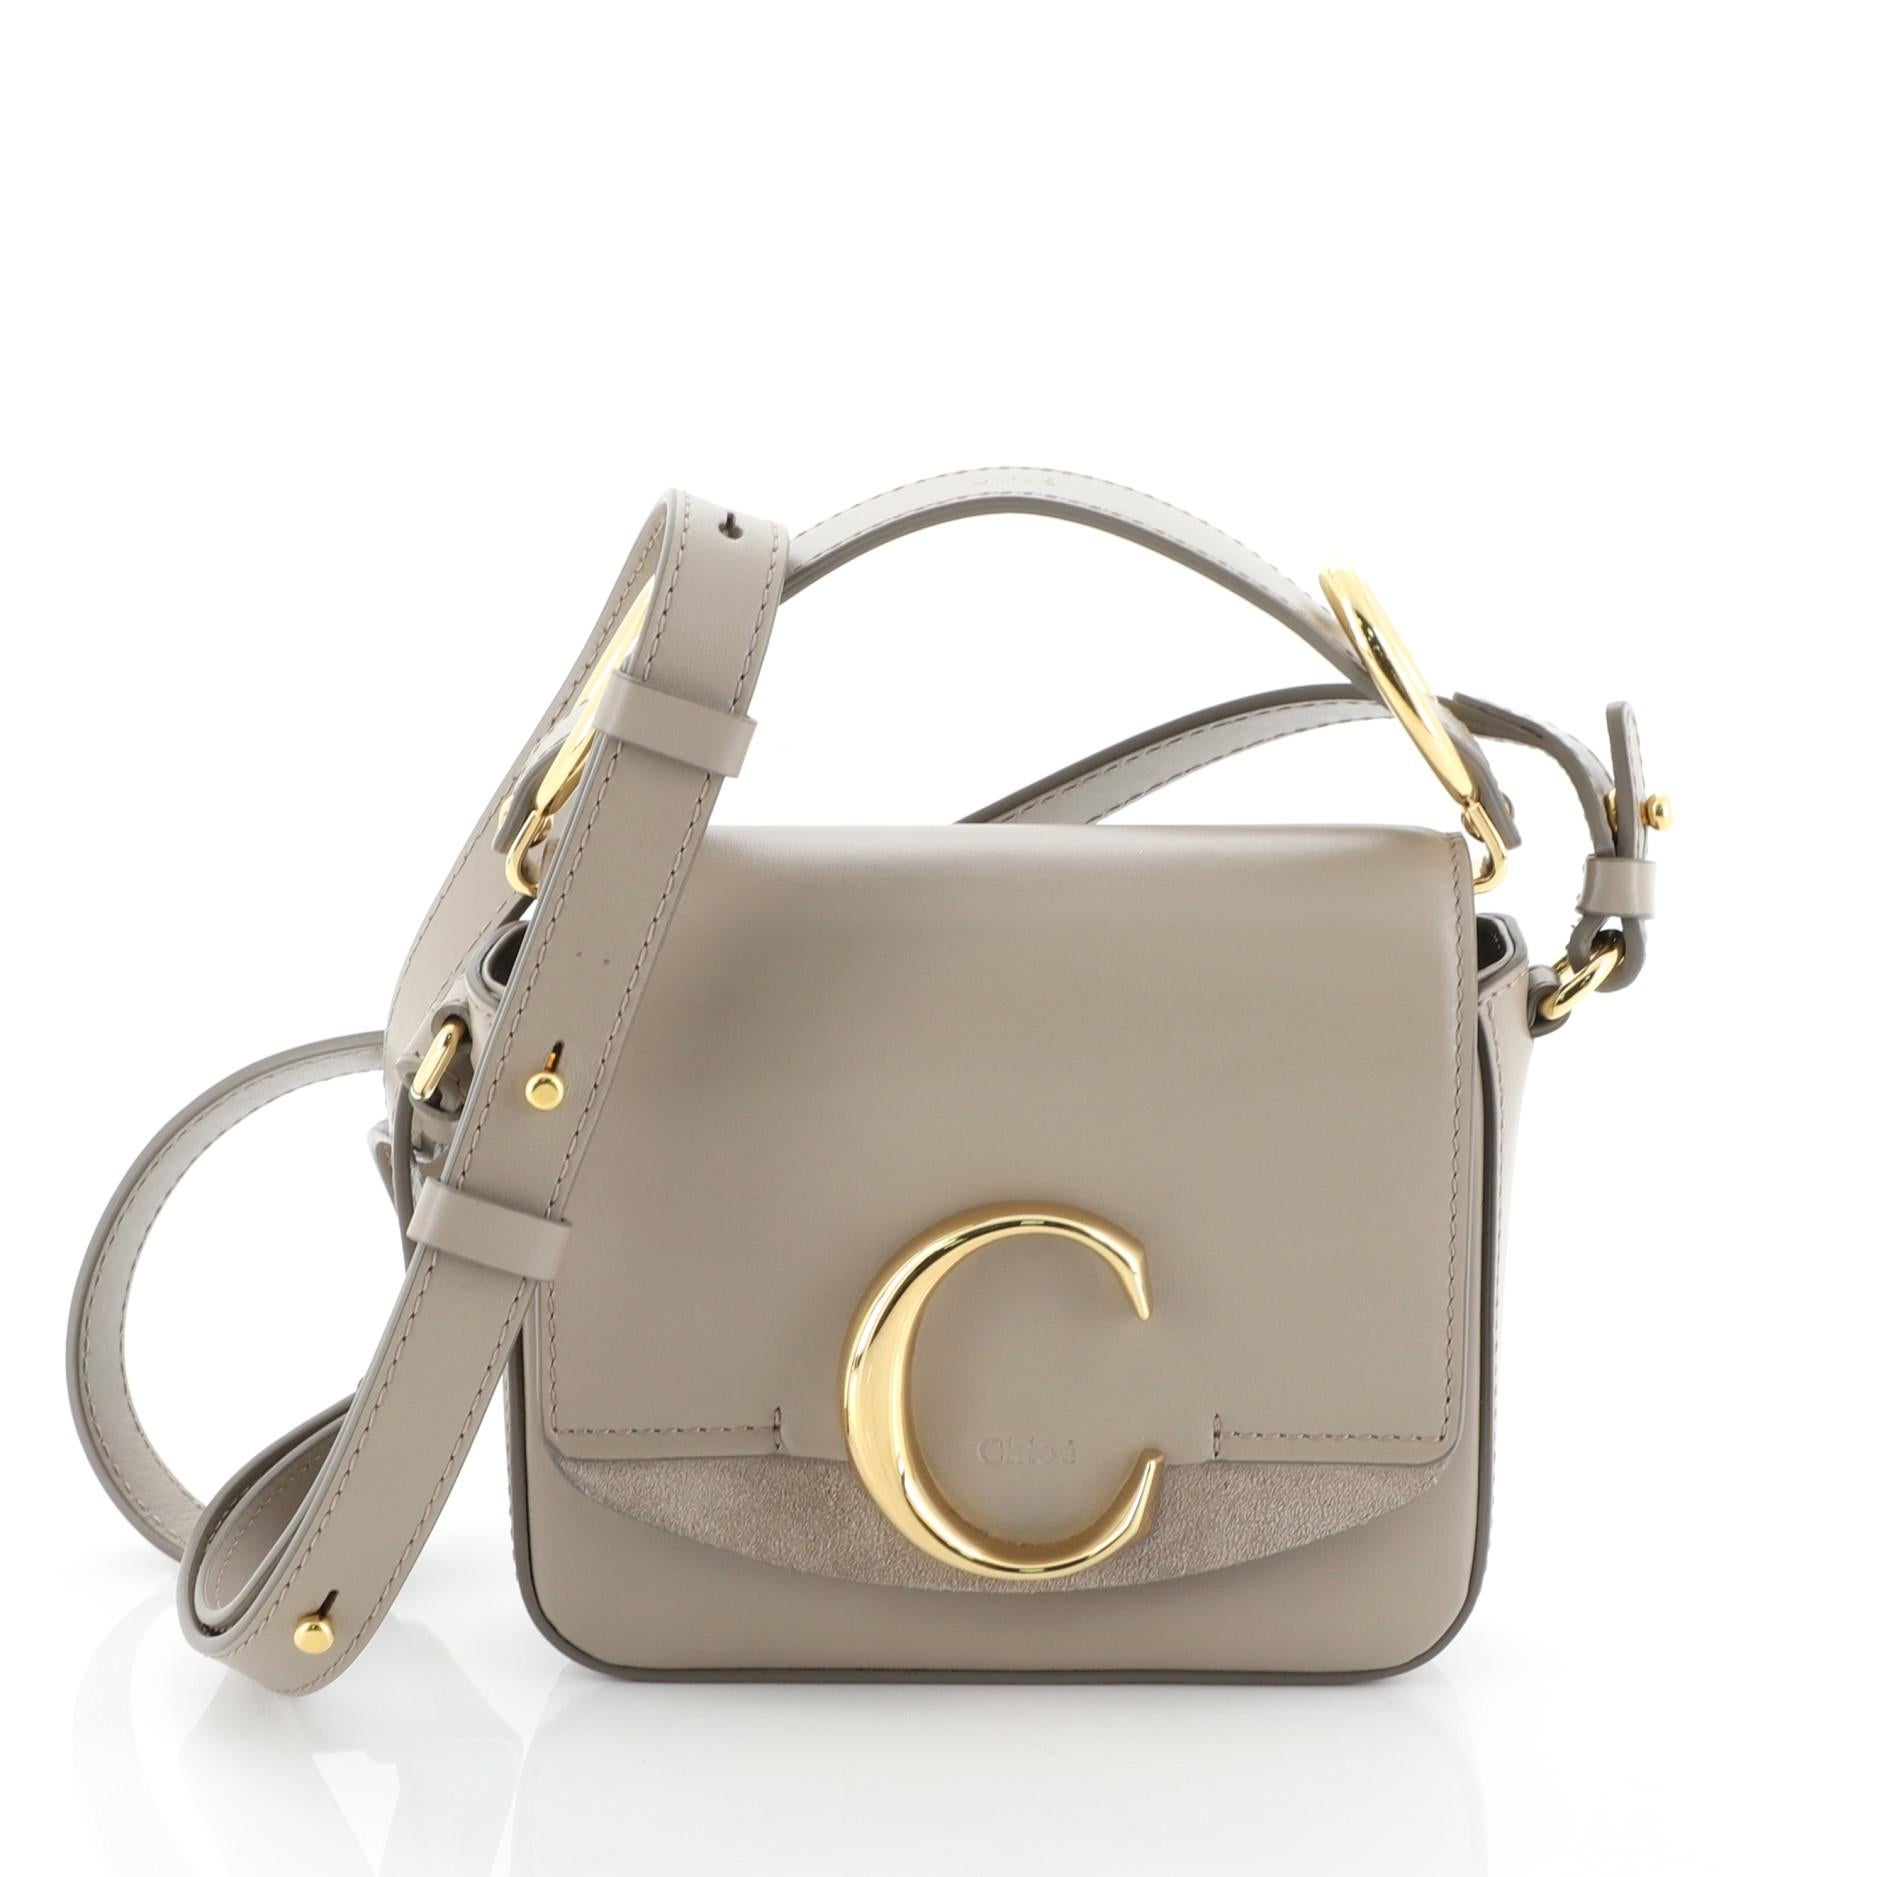 This Chloe C Crossbody Bag Leather Mini, crafted in neutral leather, features a leather top handle, C logo on flap, and gold-tone hardware. Its push-lock closure opens to a neutral fabric interior with slip pocket.

Condition: Very good. Odor in